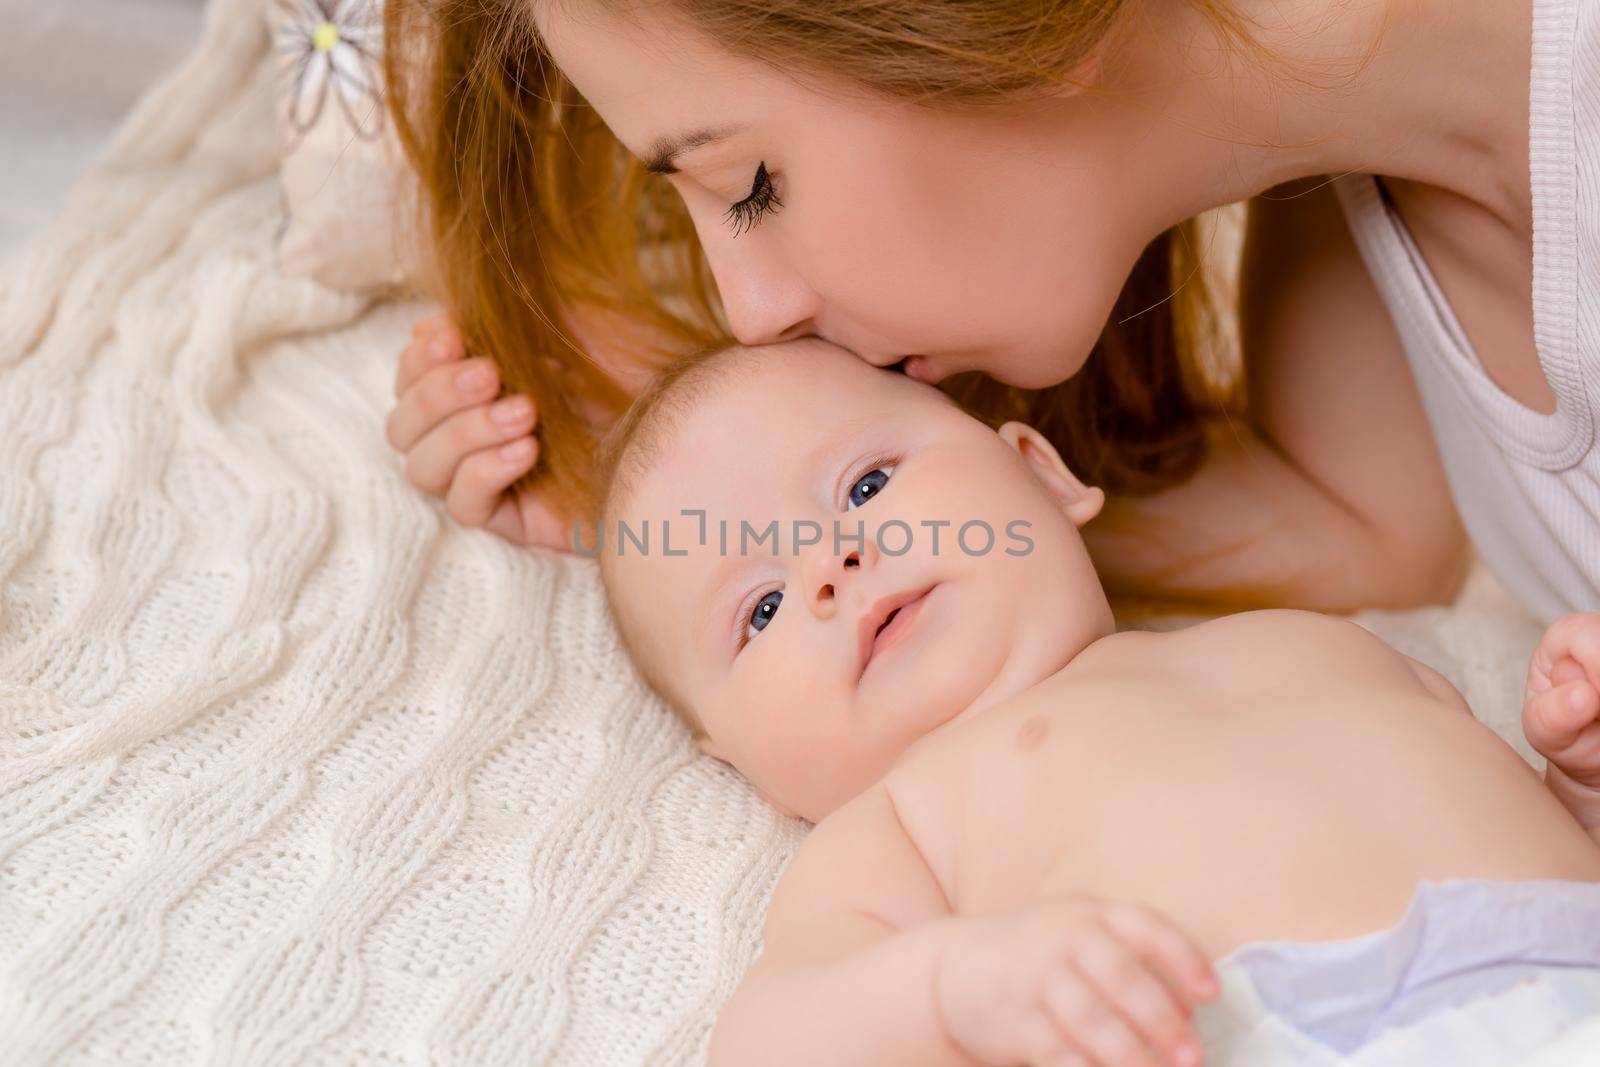 Mother and child on a white bed. Mom and baby girl in diaper playing in sunny bedroom. Parent and little kid relaxing at home. Family having fun together. Bedding and textile for infant nursery.